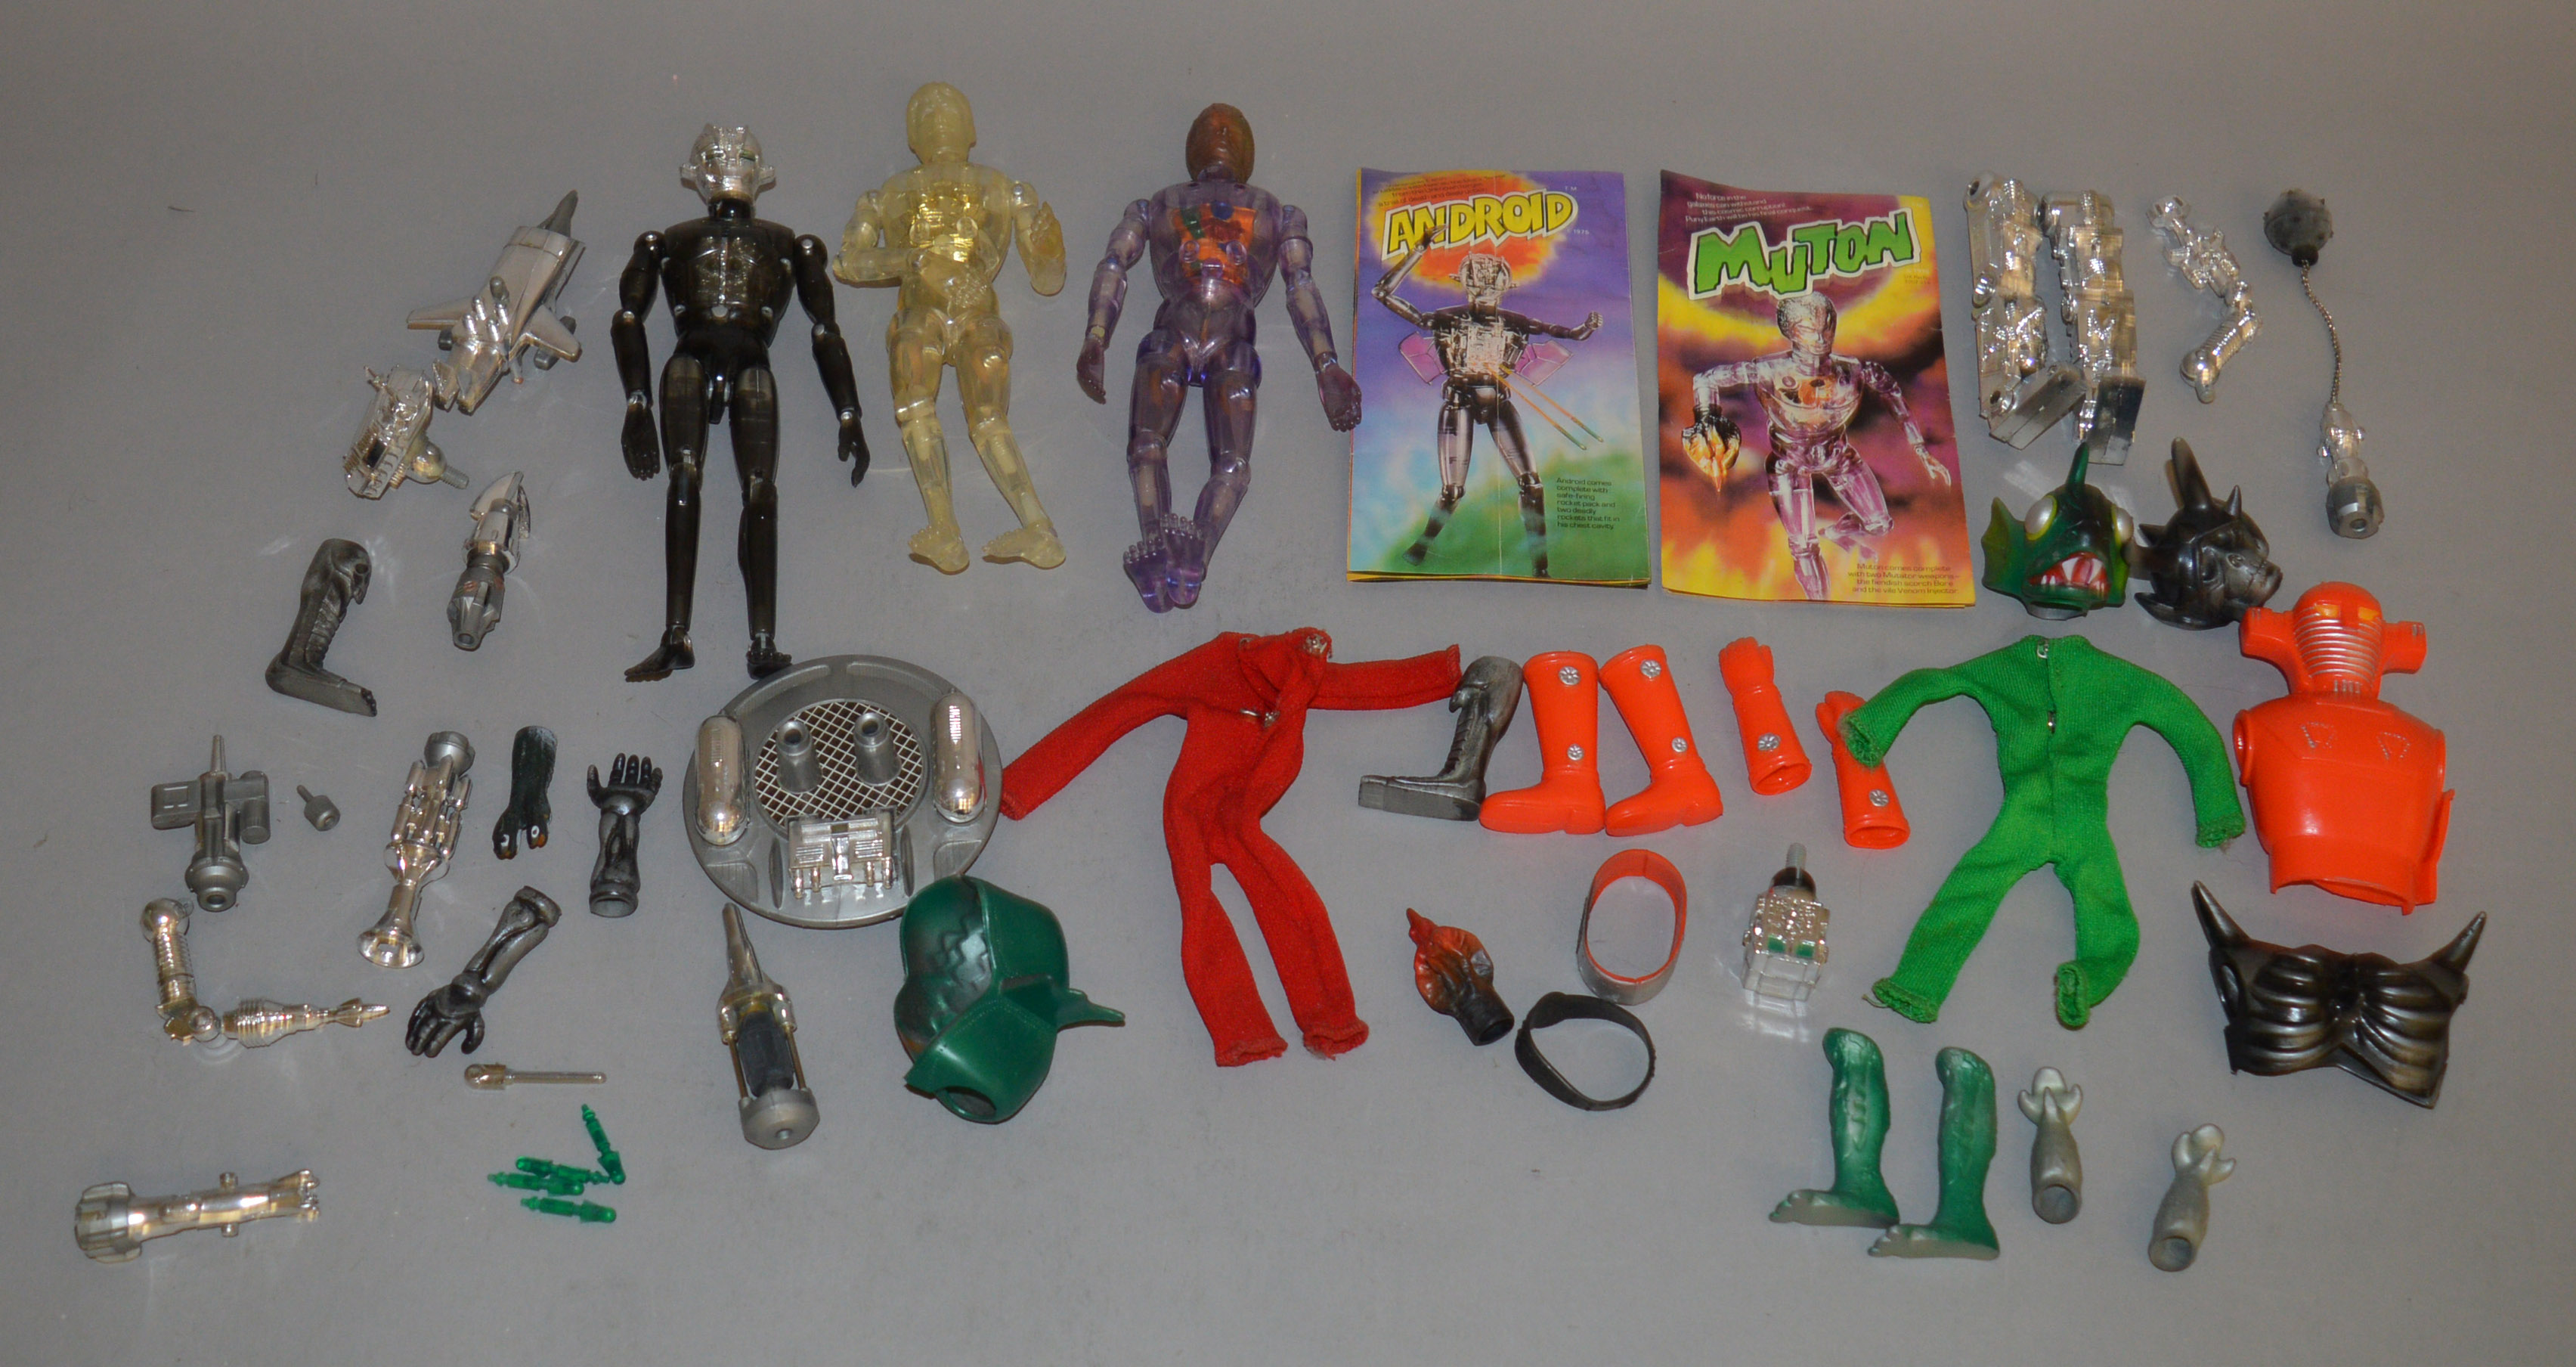 3 unboxed 'Muton' action figures, by Denys Fisher Toys, including Android and Cyborg, together